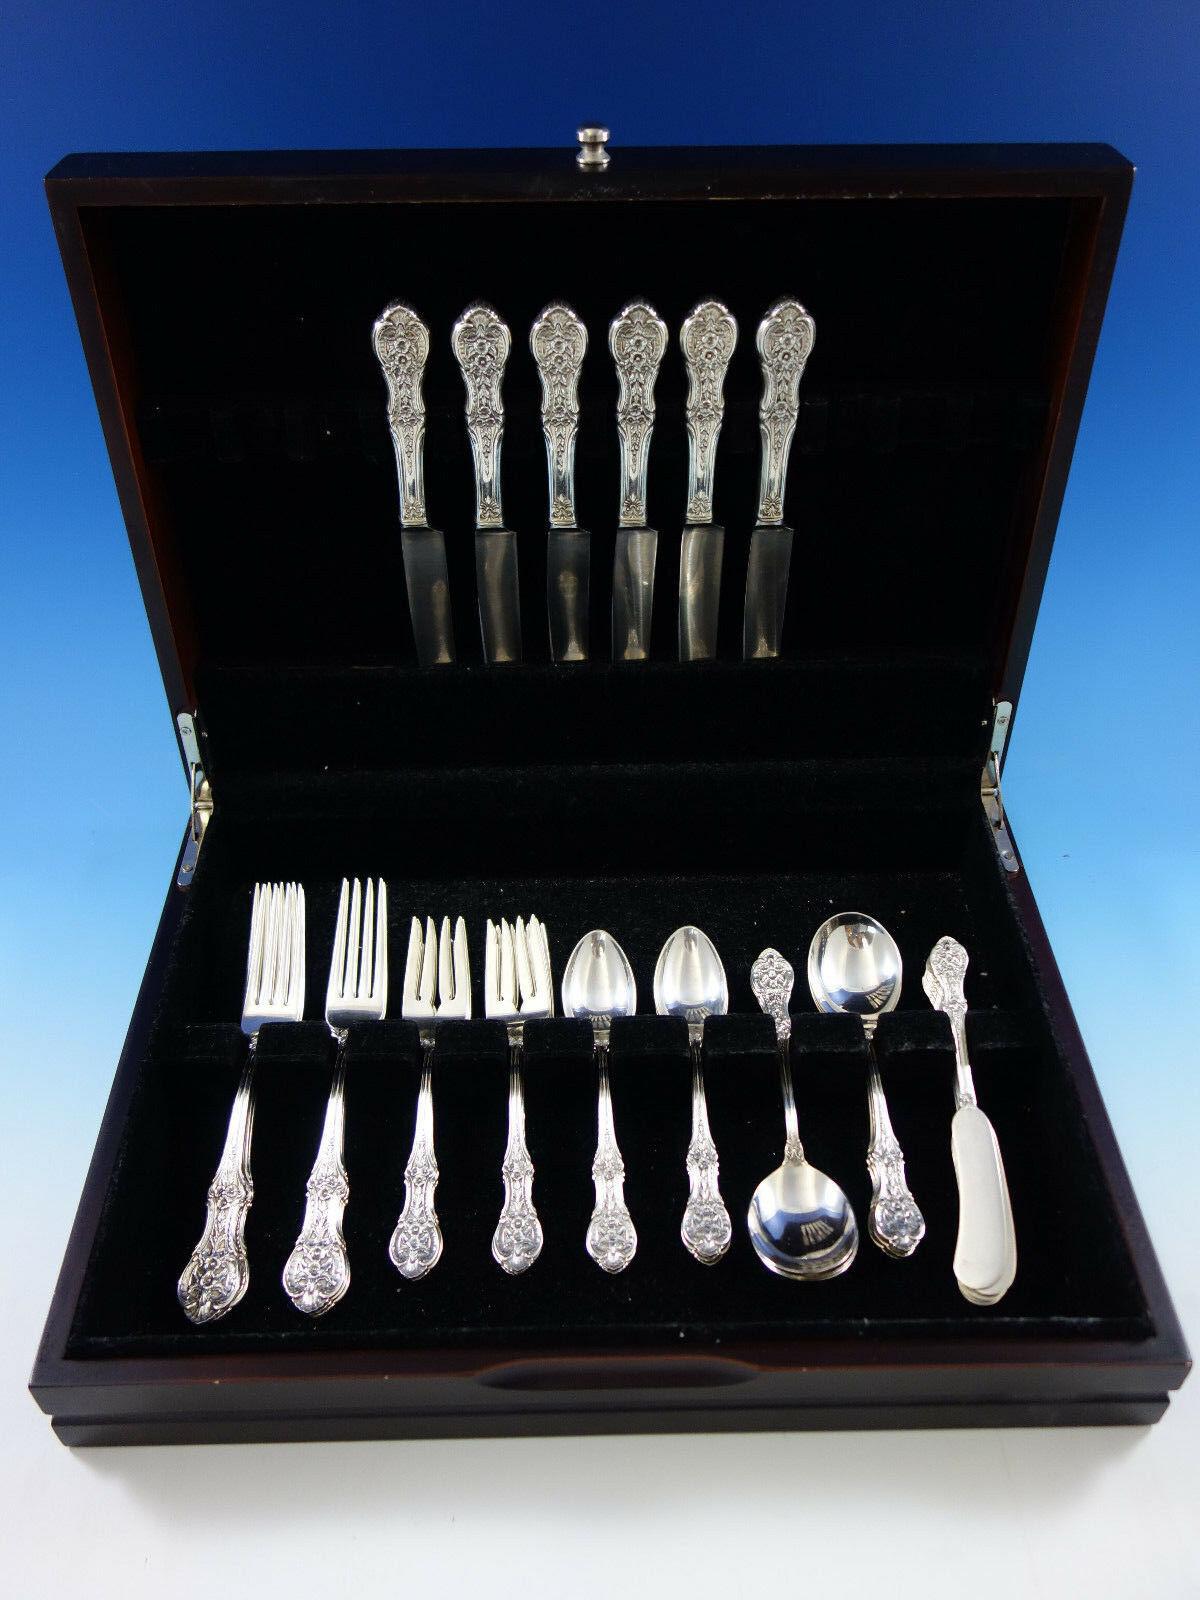 Springtime by International sterling silver flatware set, 36 pieces. Great starter set! This set includes:

6 knives, 8 1/2